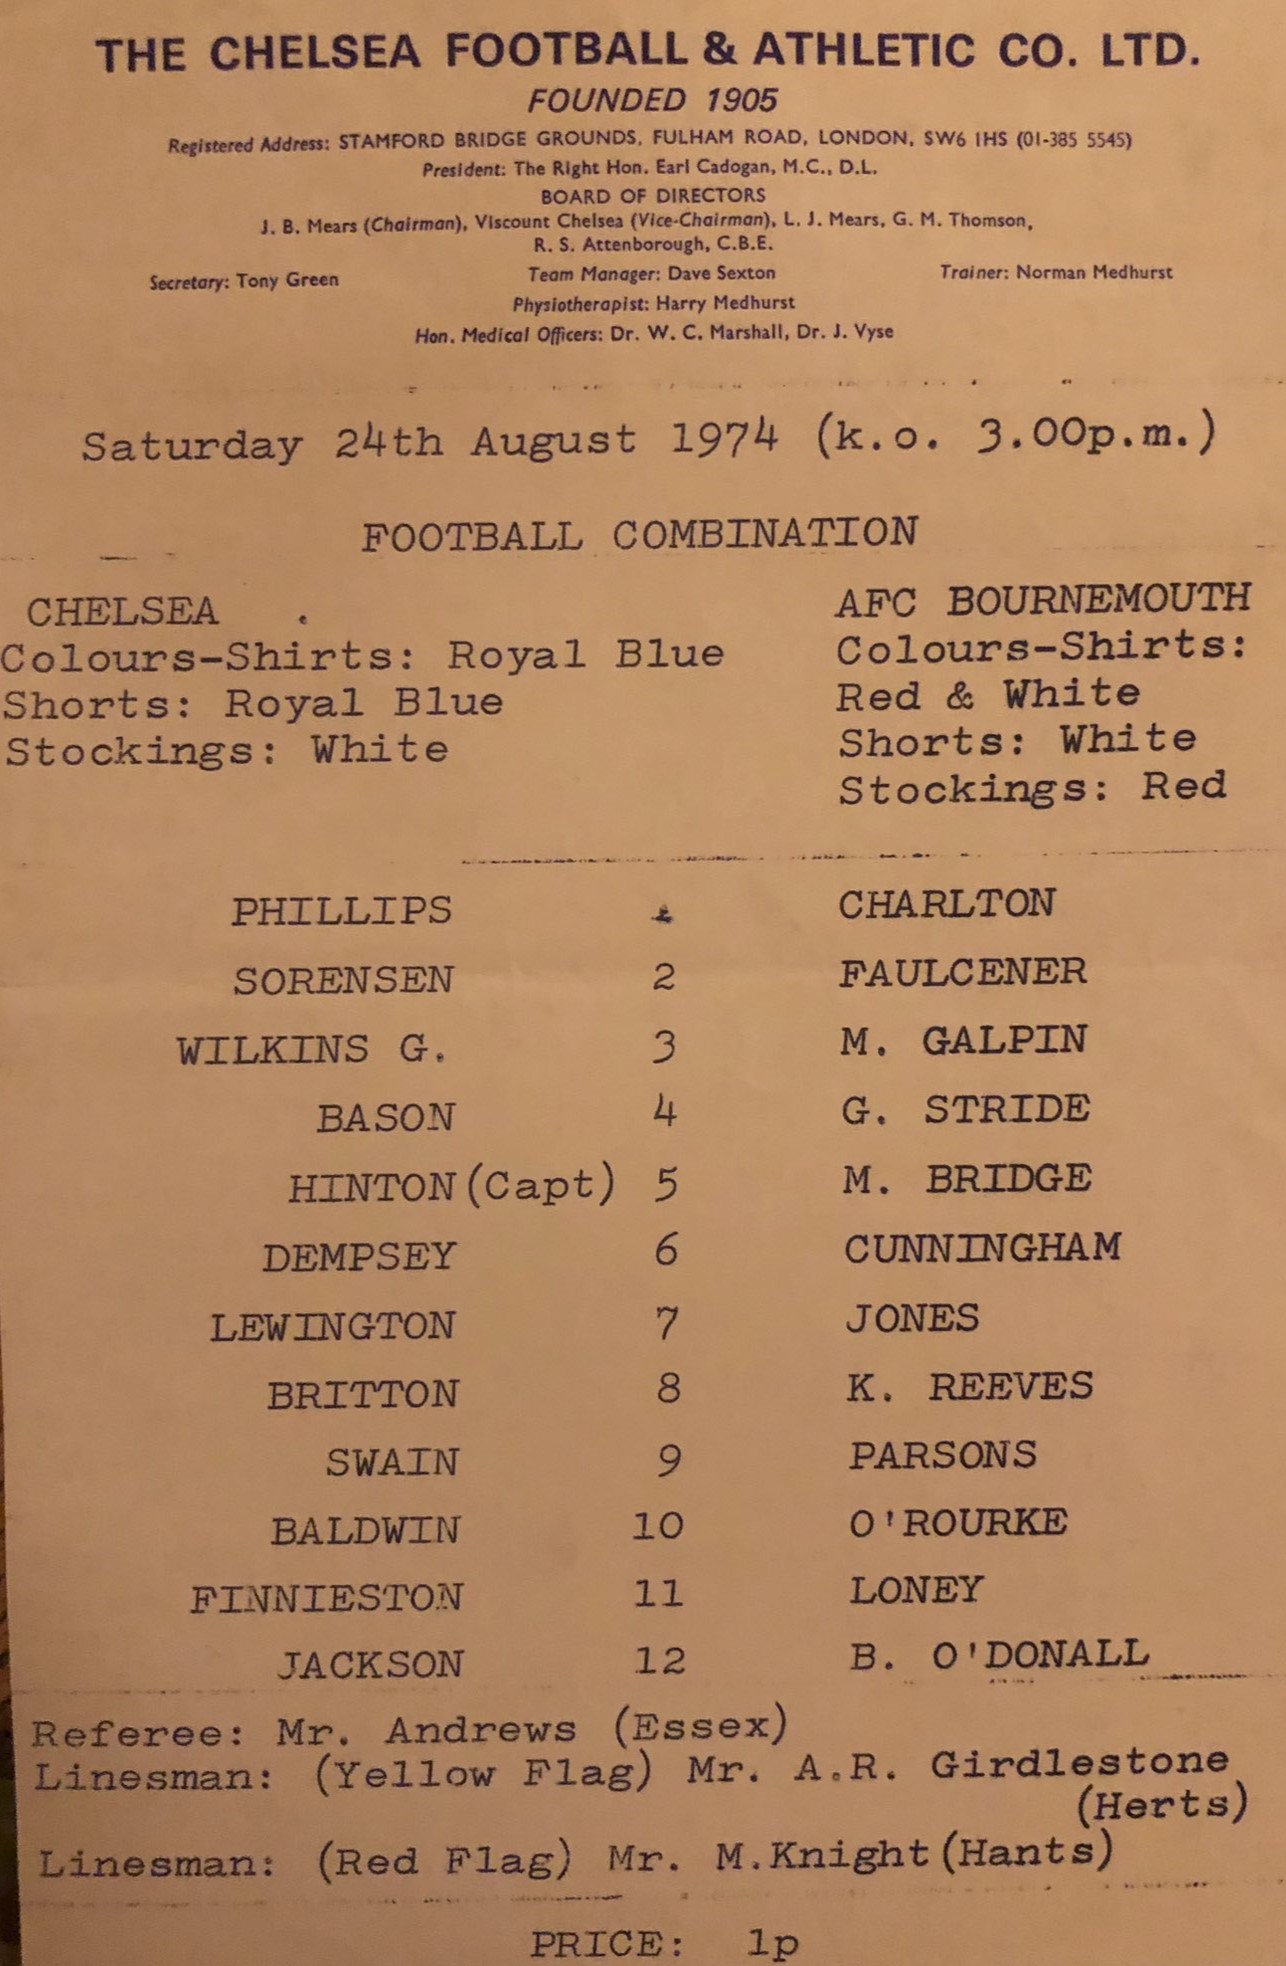 programme cover for Chelsea v AFC Bournemouth, 24th Aug 1974